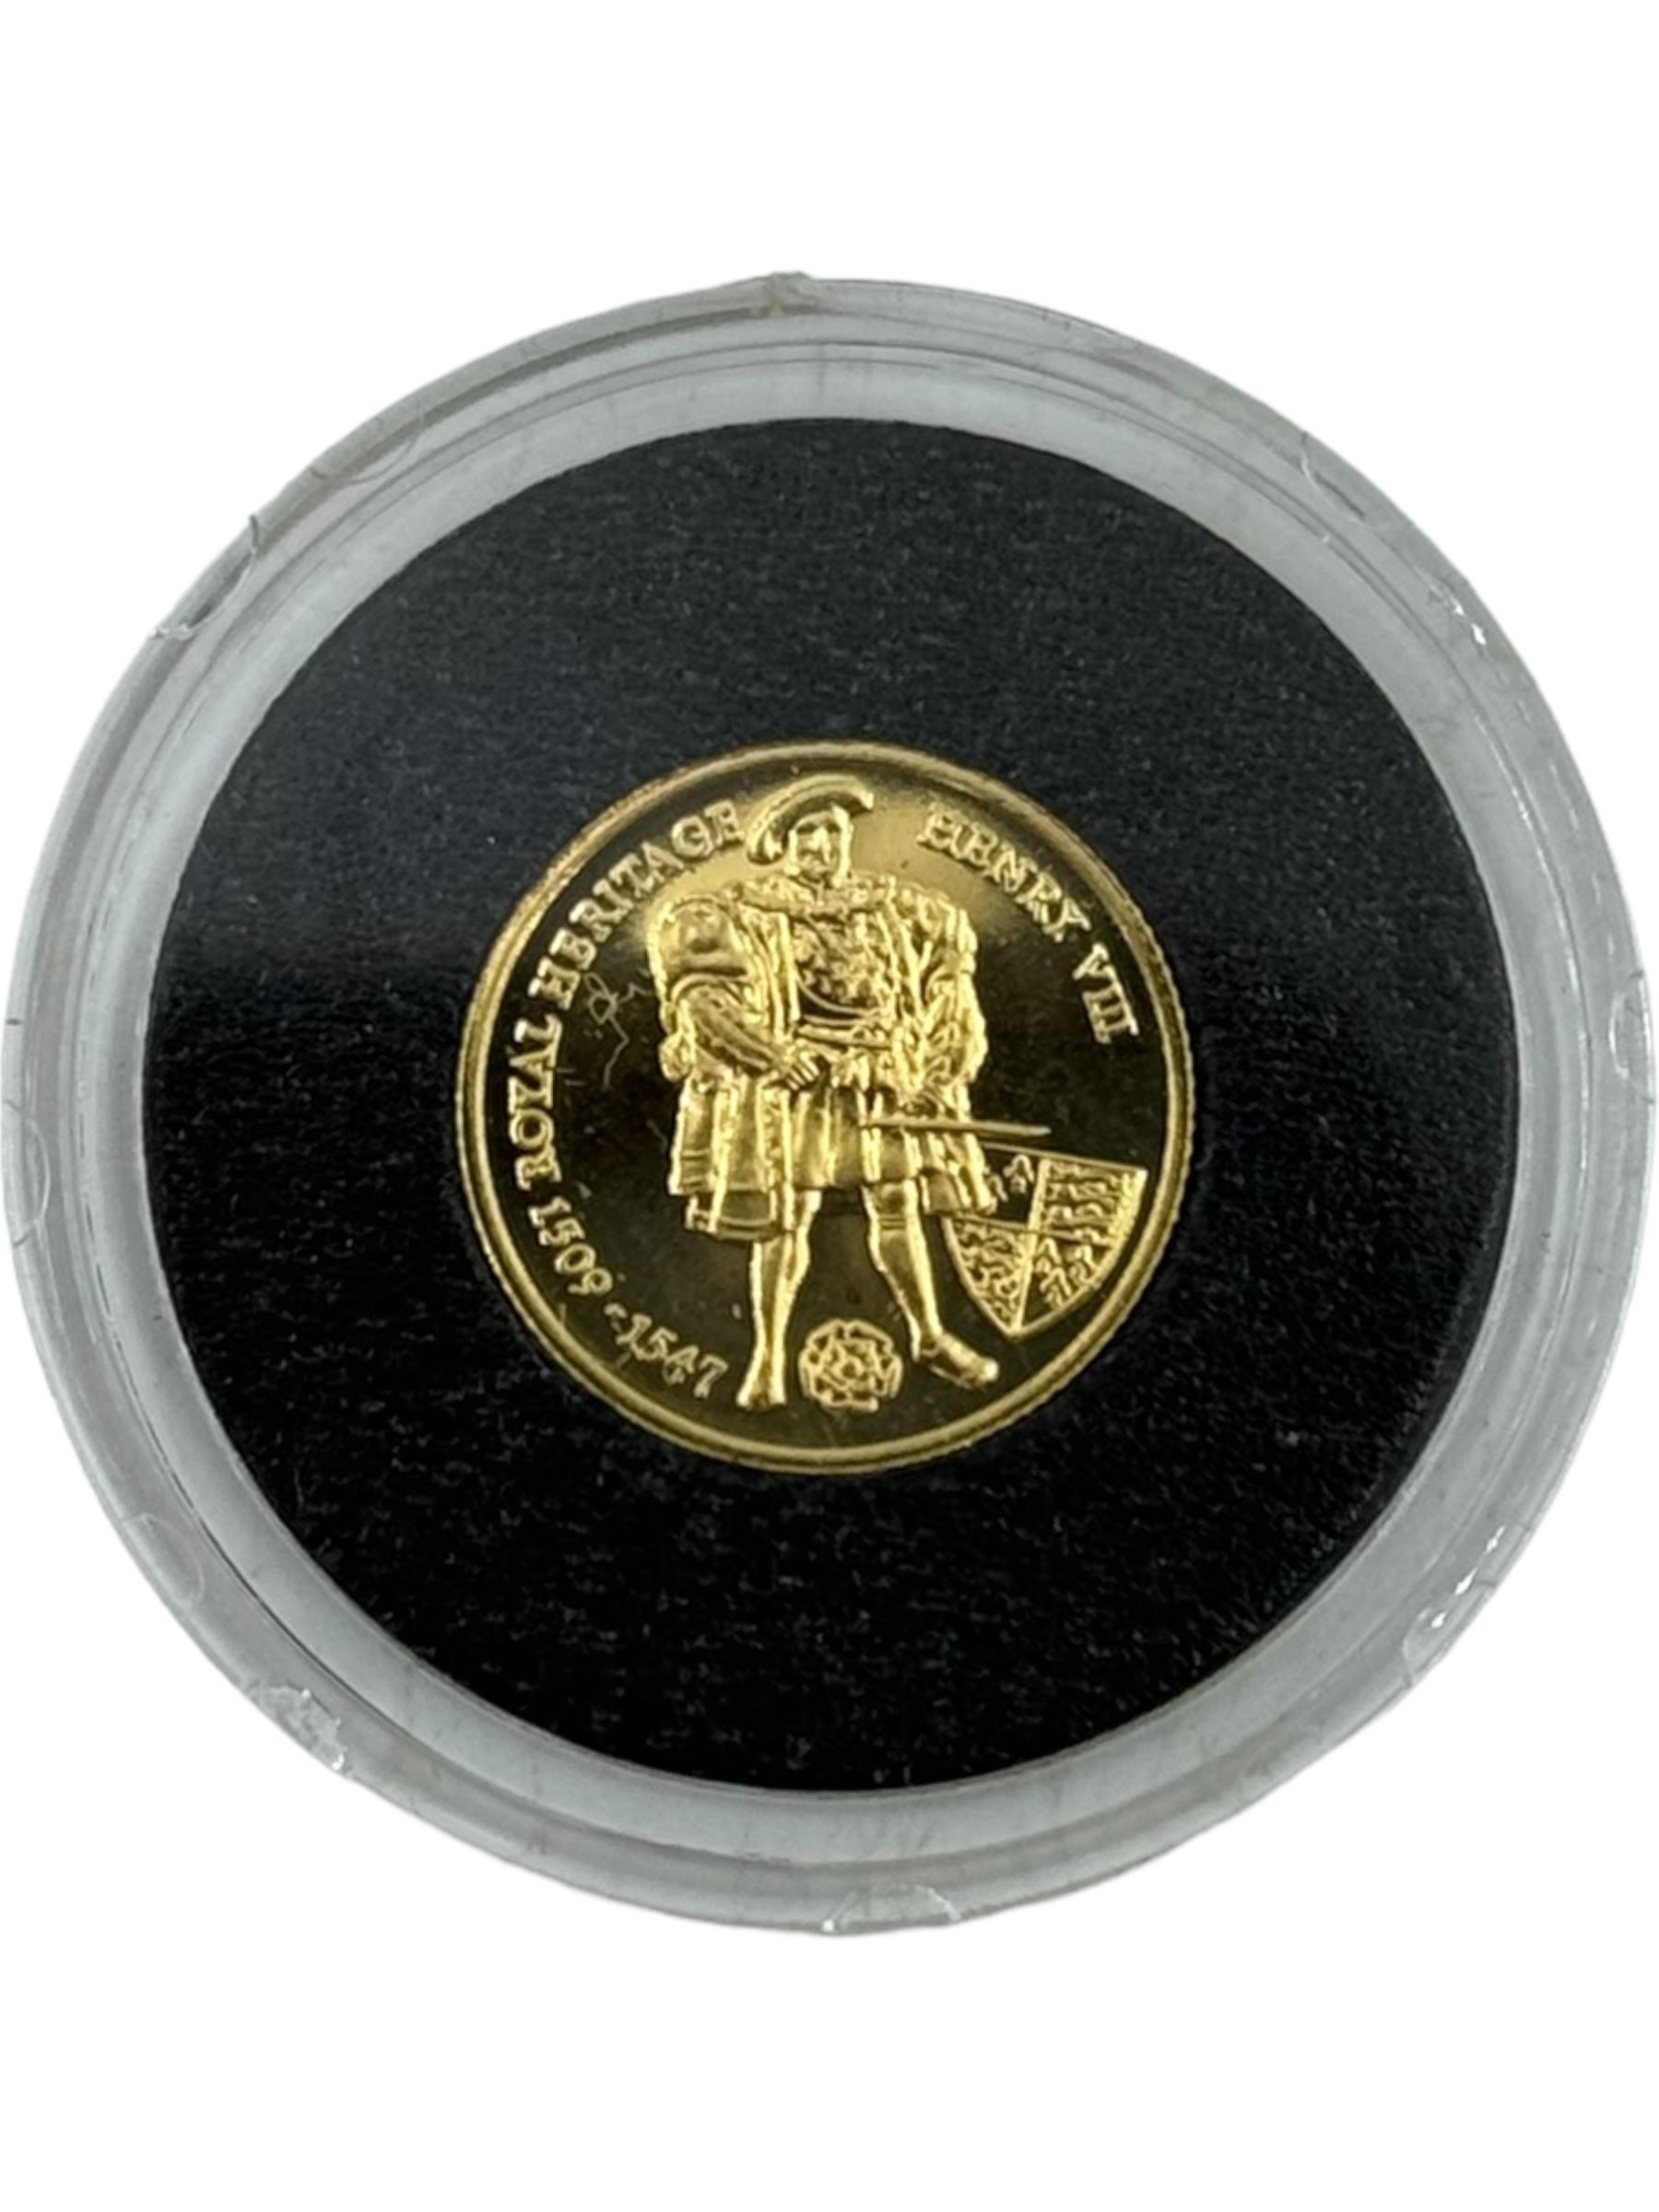 Four one twenty-fifth of an ounce 24 carat gold coins - Image 3 of 9